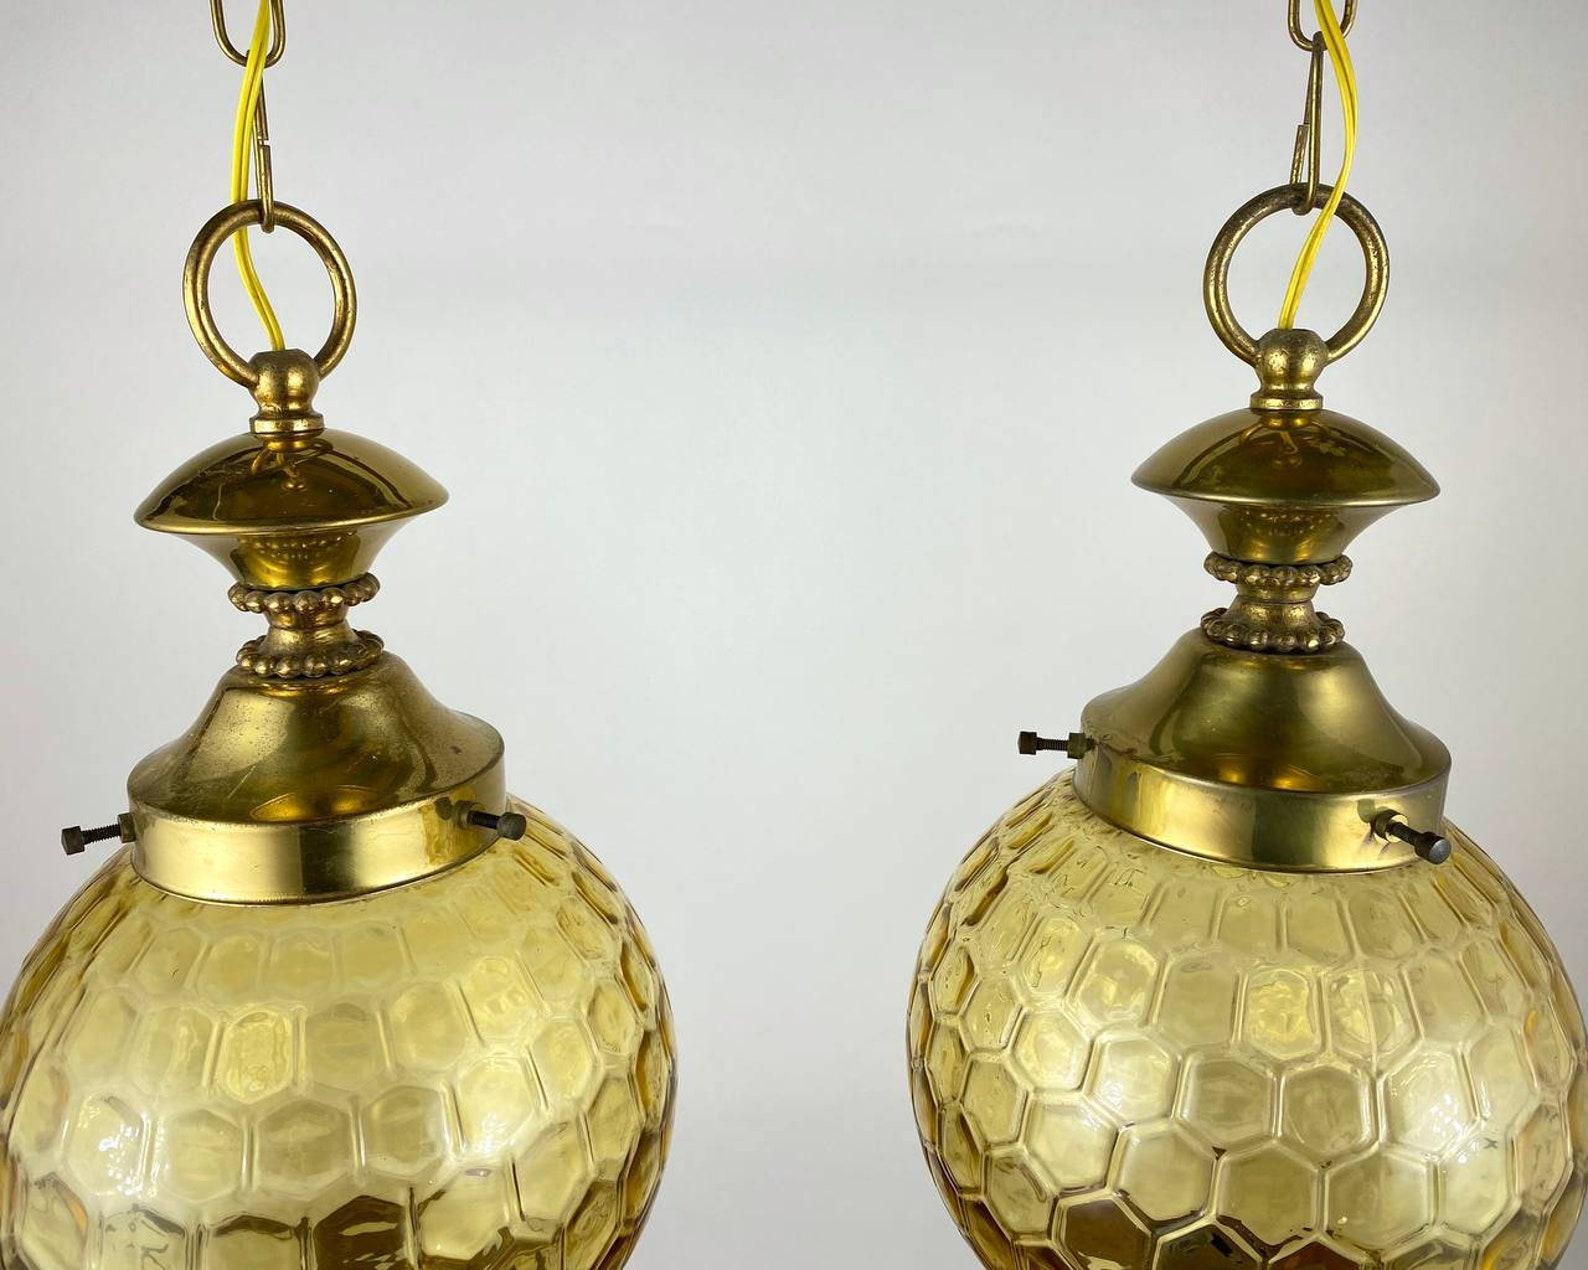 Hand-Crafted Vintage Ceiling Lamp or Lantern Gilt Brass and Textured Glass Suspention For Sale